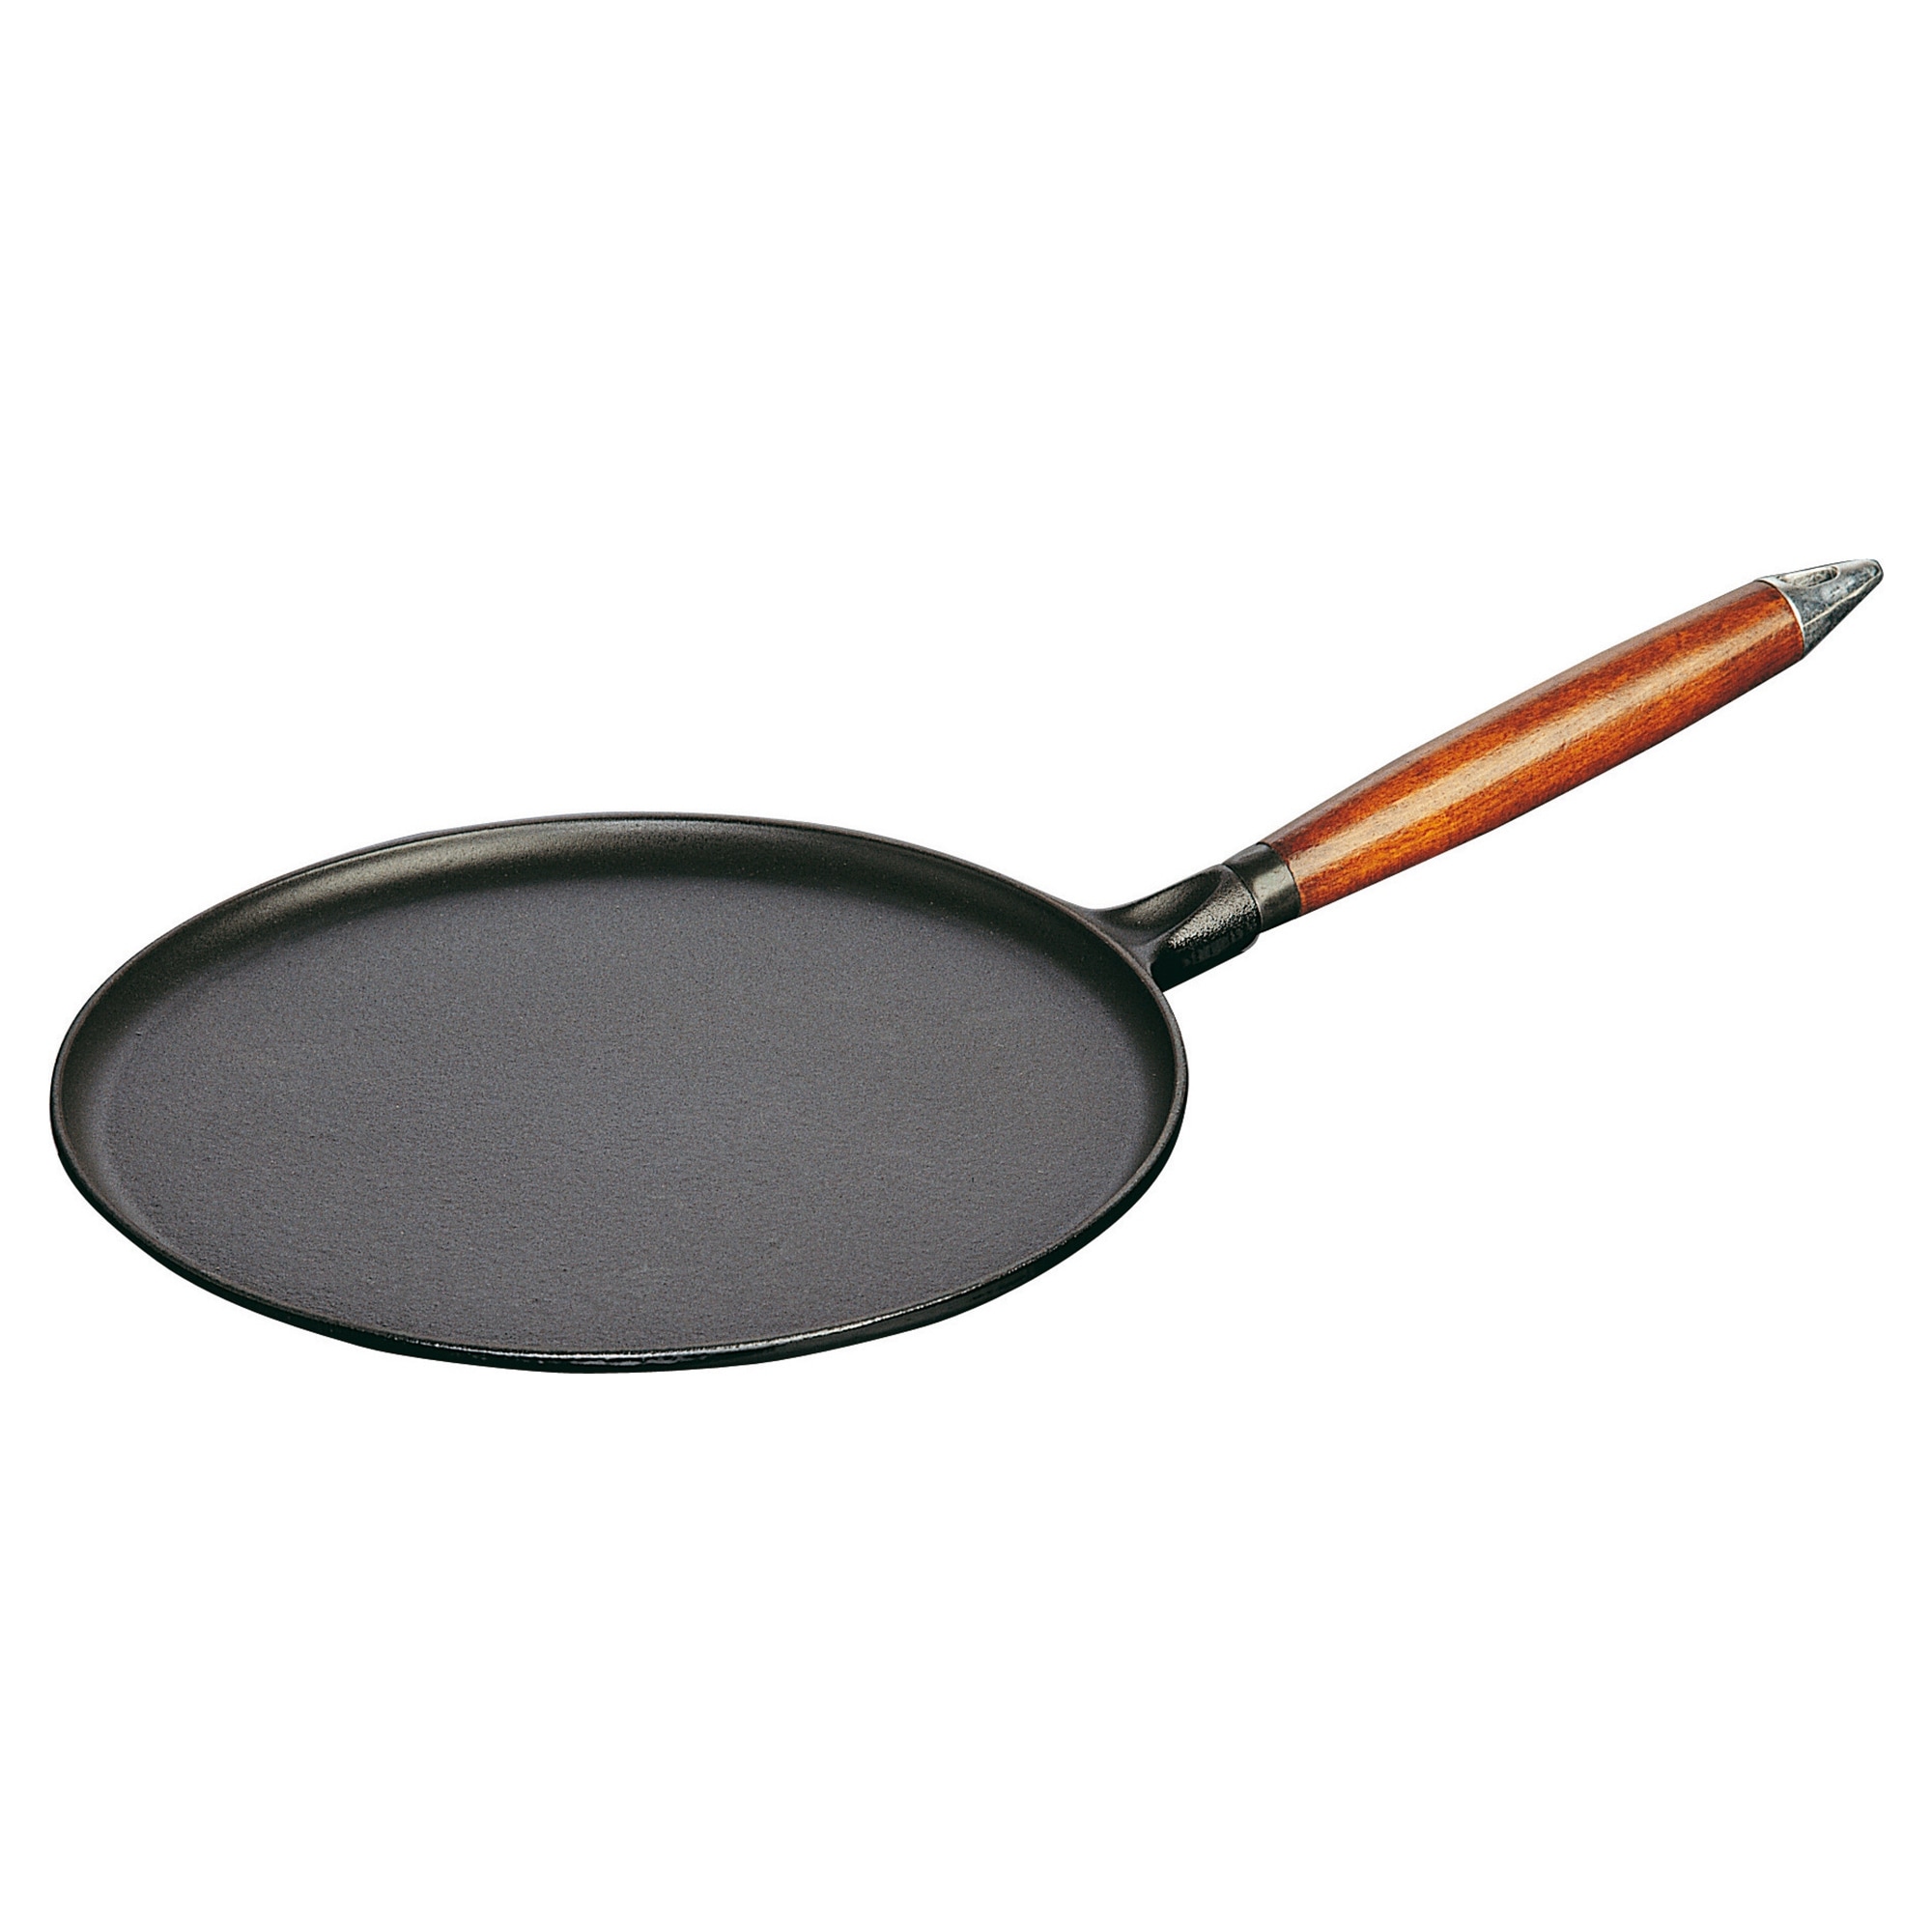 https://ak1.ostkcdn.com/images/products/is/images/direct/7a2f2e2d0507bbab176d42ca0e77aecfba7073ed/Staub-Cast-Iron-11%22-Crepe-Pan-with-Spreader-%26-Spatula---Matte-Black.jpg